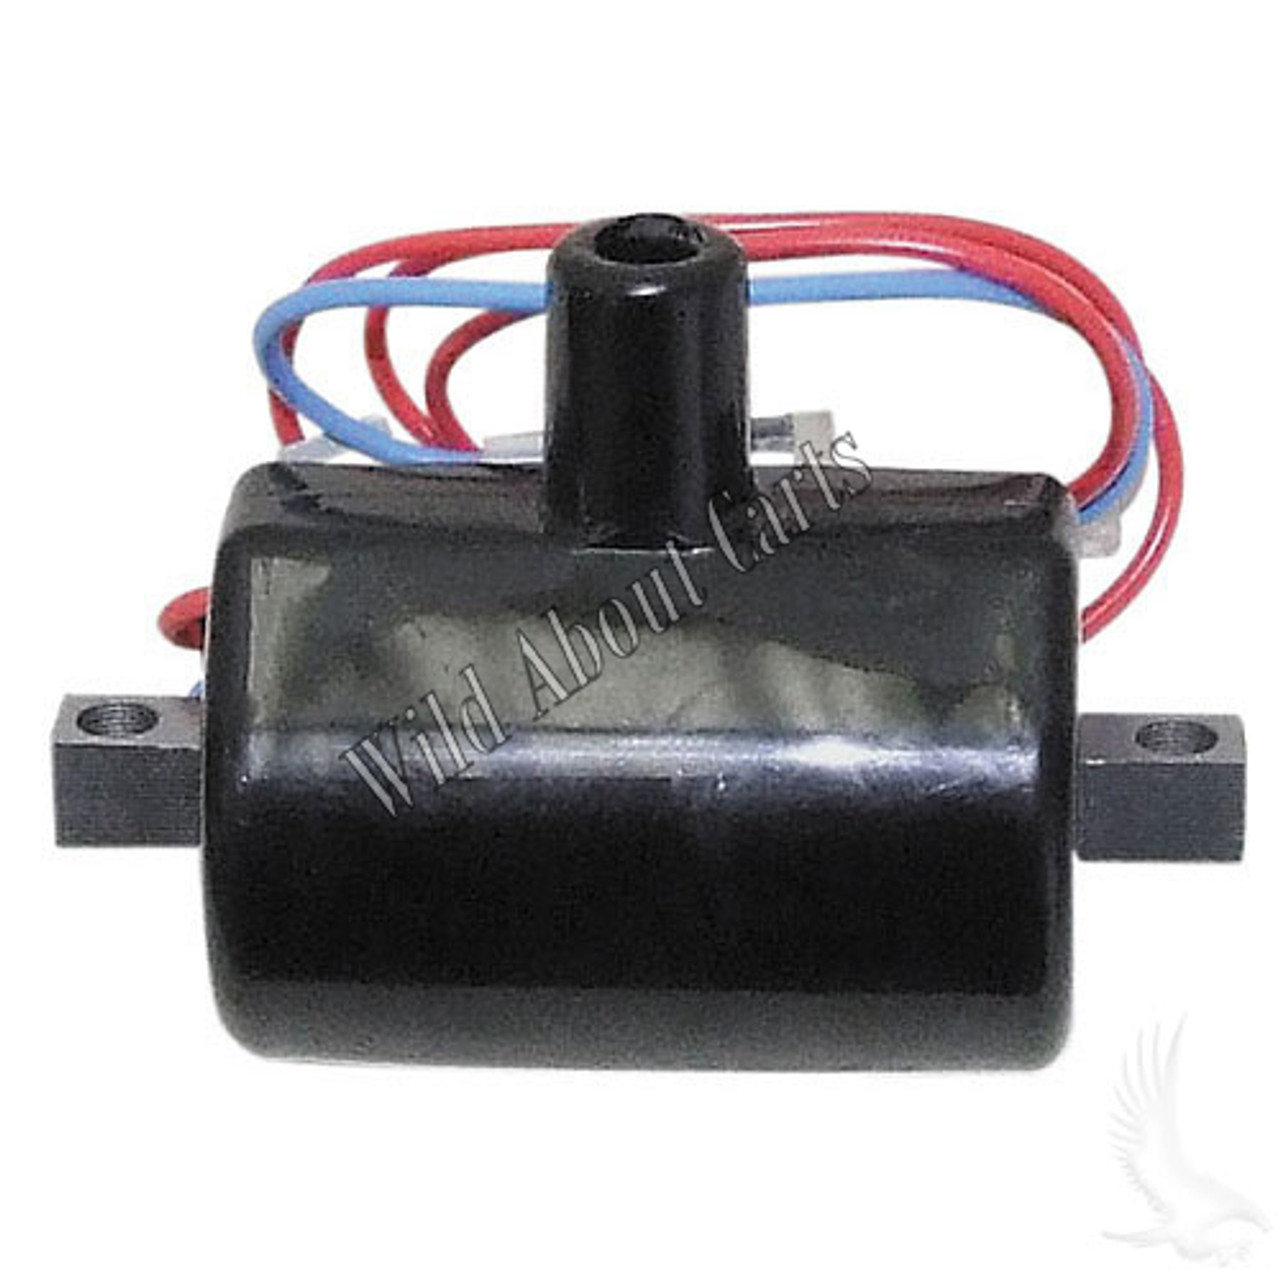 Ignition Coil for E-Z-Go 1989-1993 2 Cycle Gas Golf Cart, ENG-115, 19669G1, 23782G1, 5121